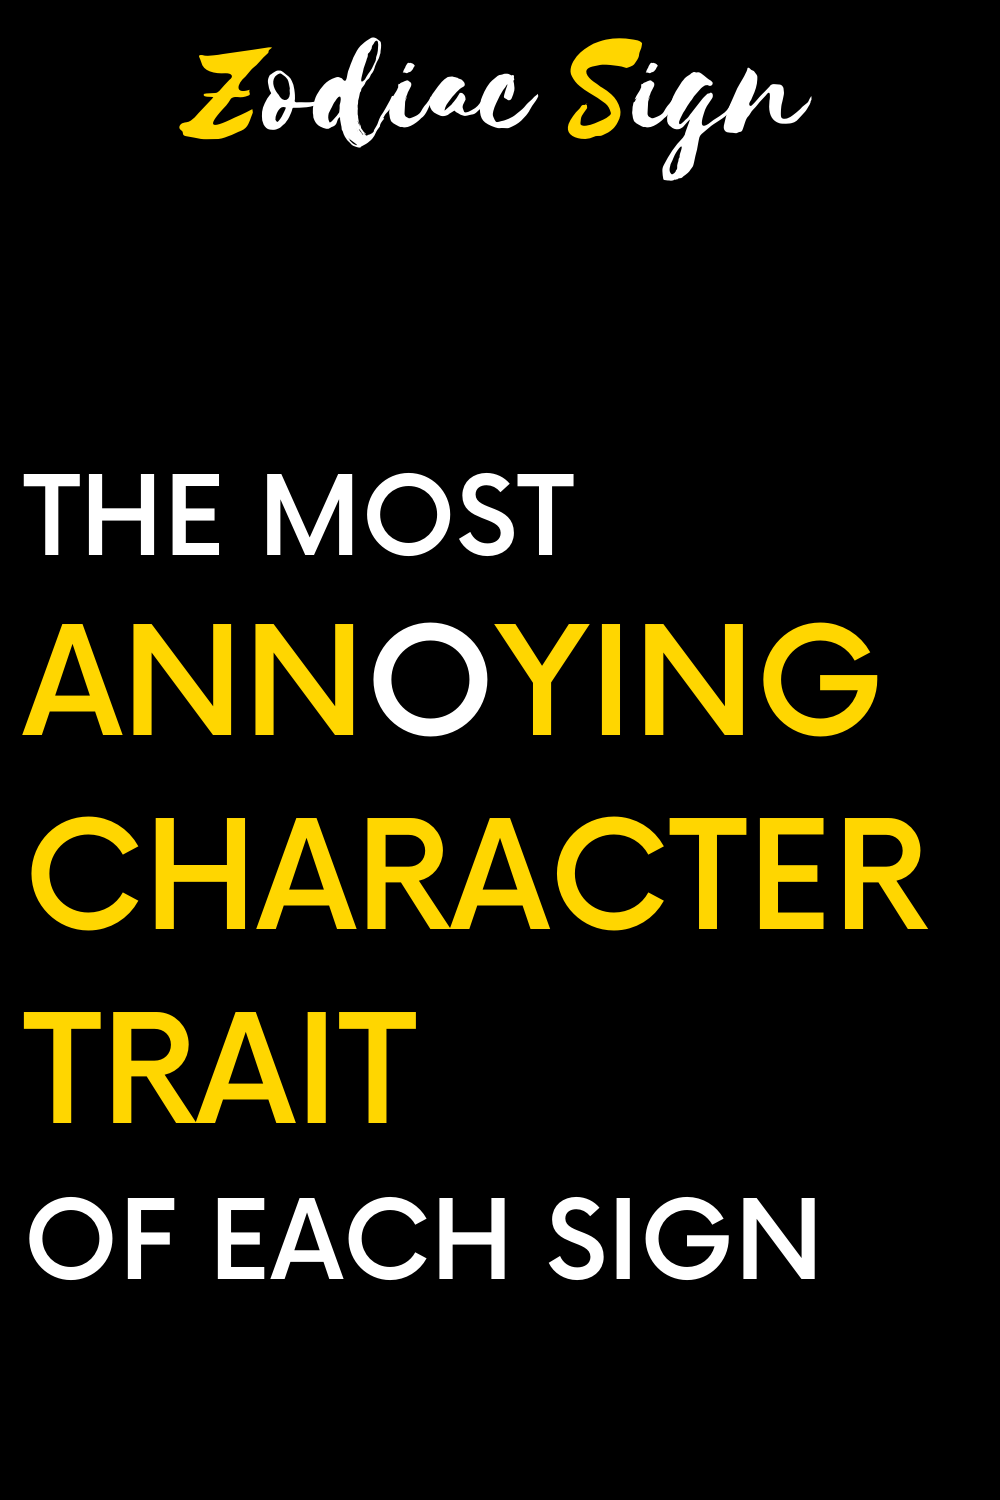 The most annoying character trait of each sign